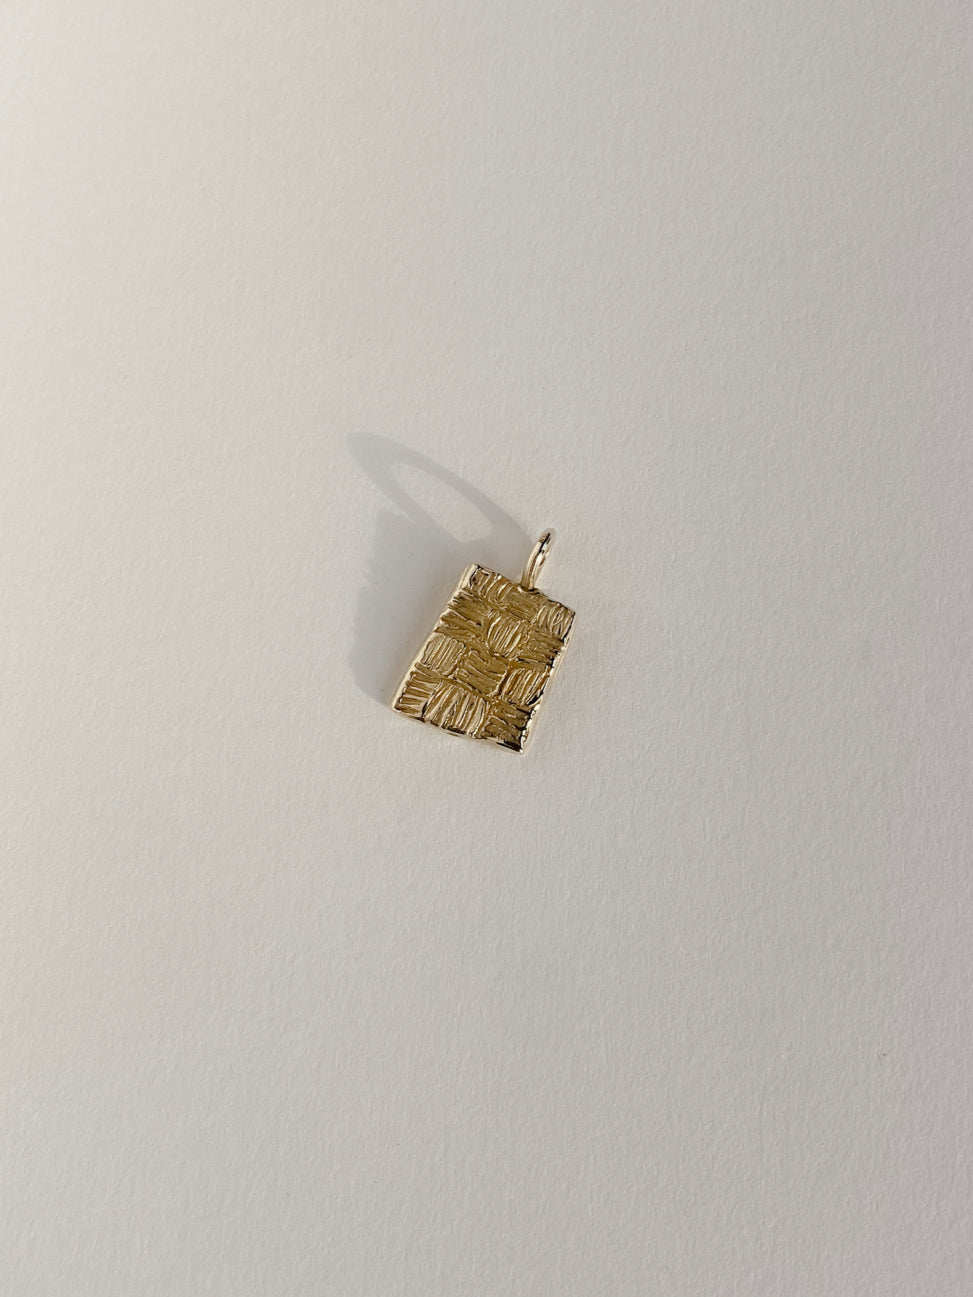 Gold rectangular pendant with checker lines on white background